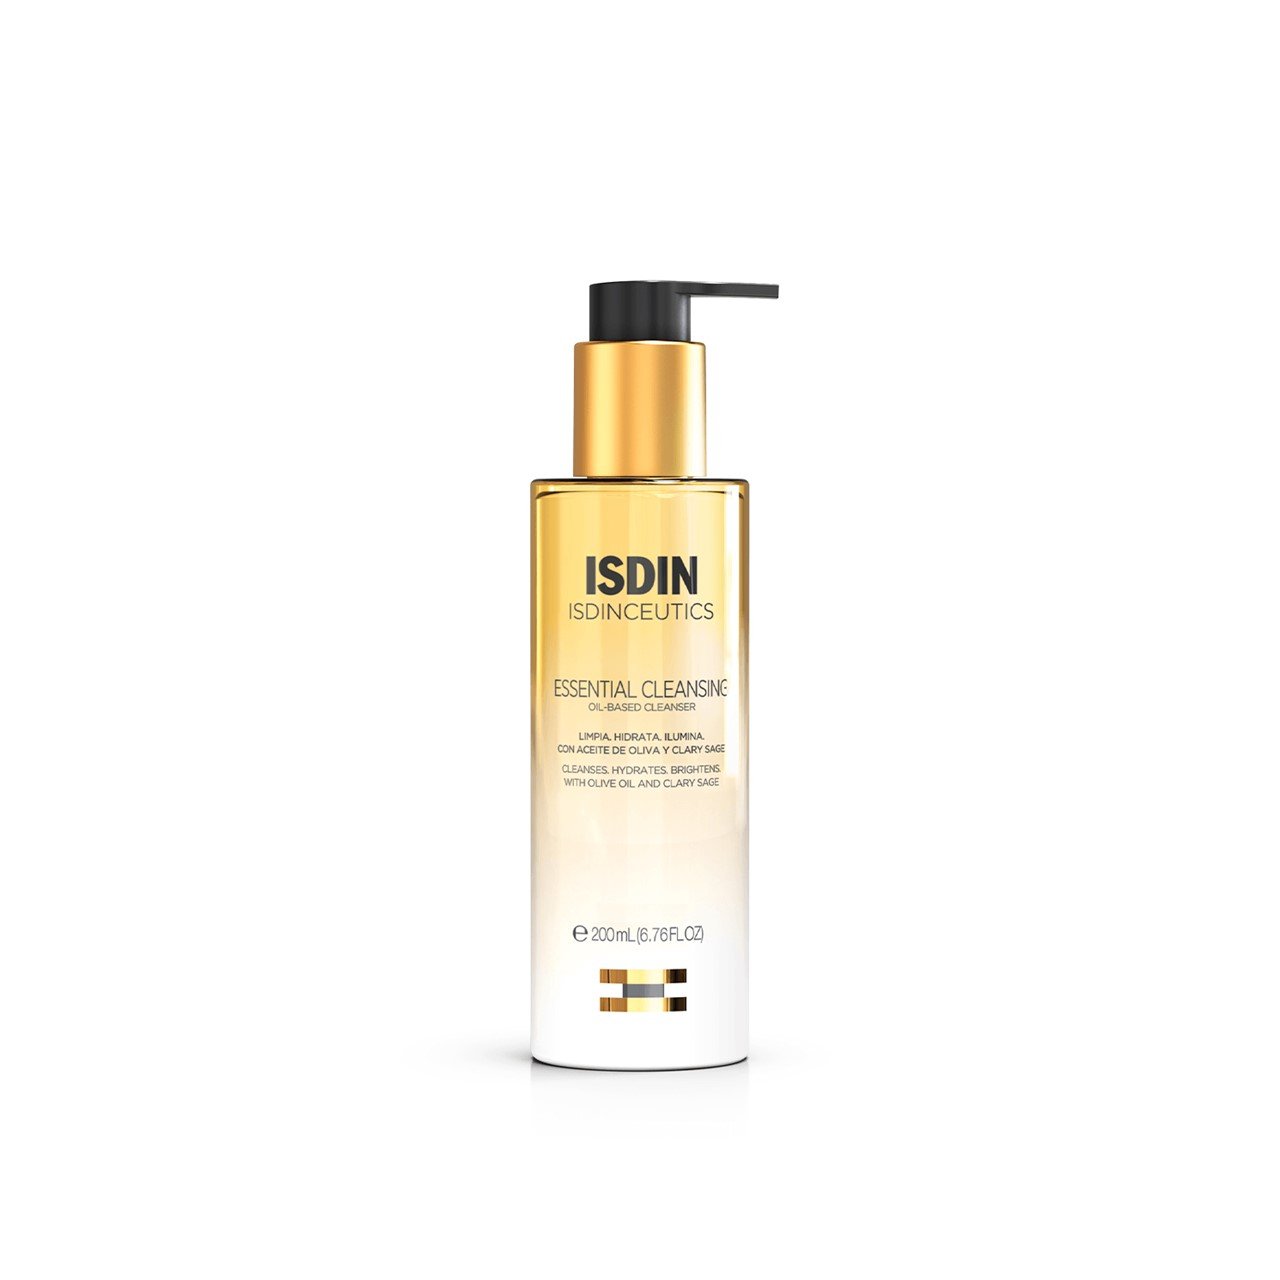 ISDINCEUTICS Essential Cleansing Oil-Based Cleanser 200ml